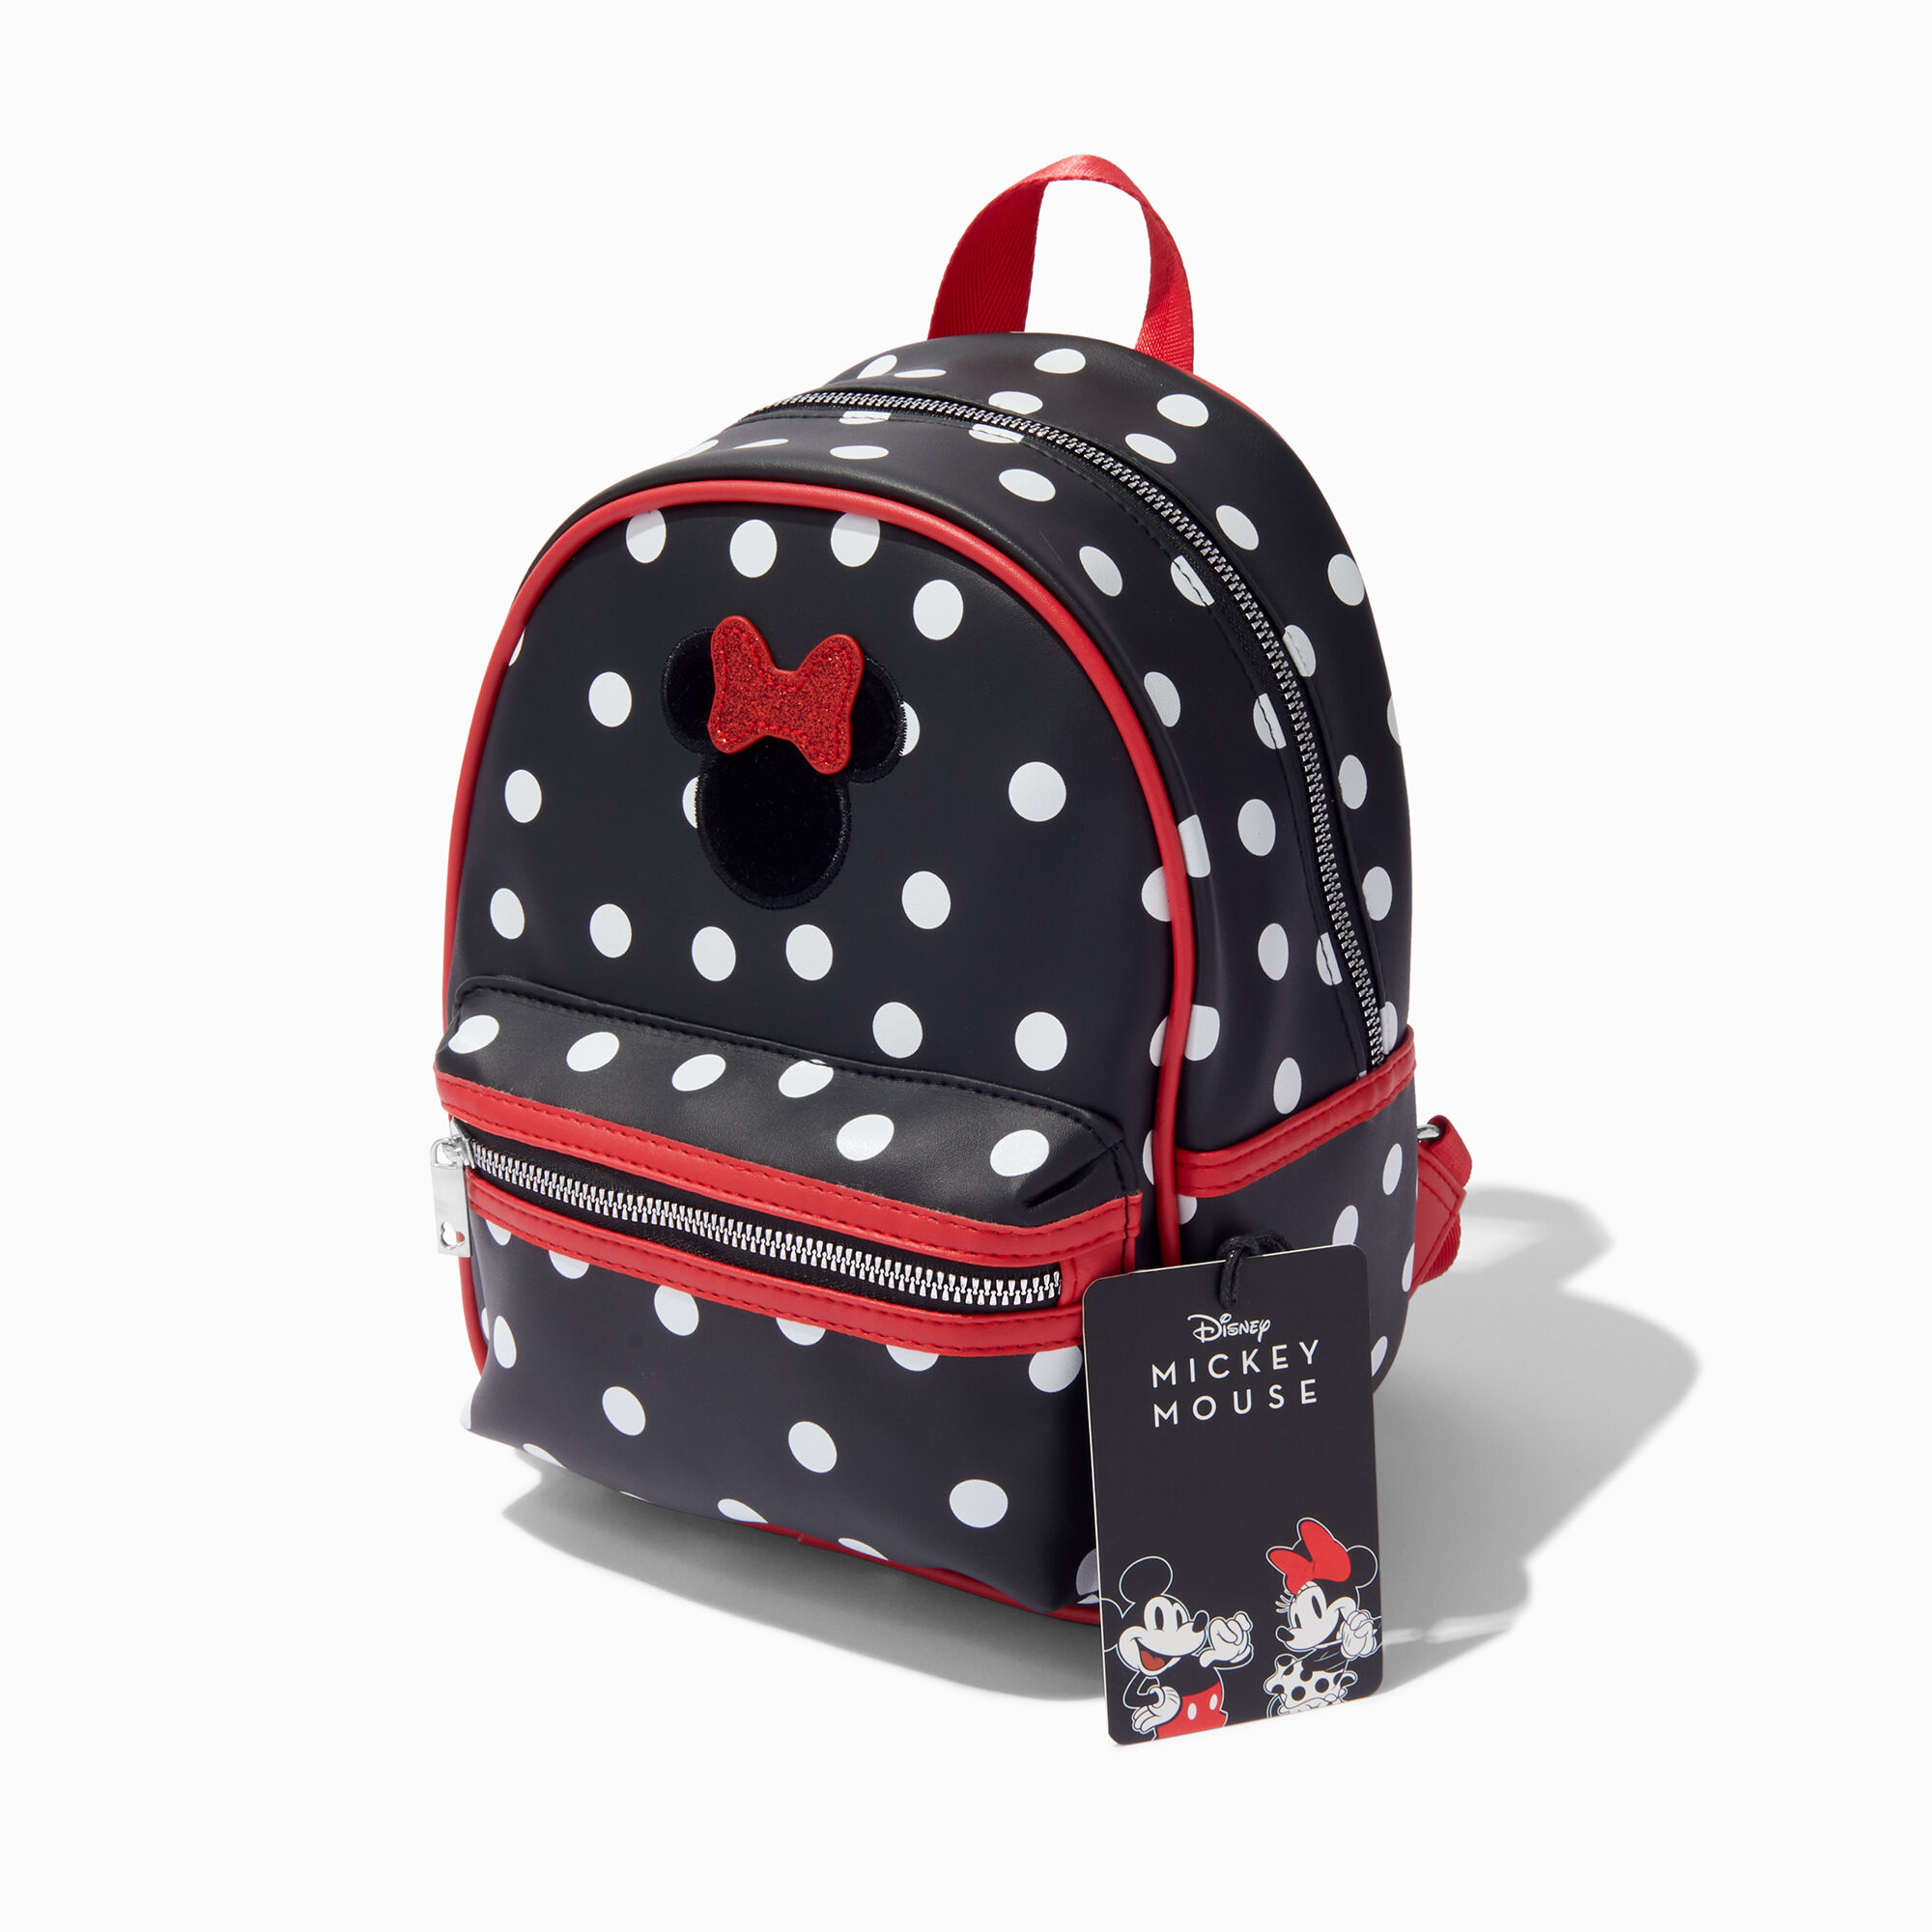 View Claires Disney 100 Minnie Mouse Polka Dot Mini Backpack information